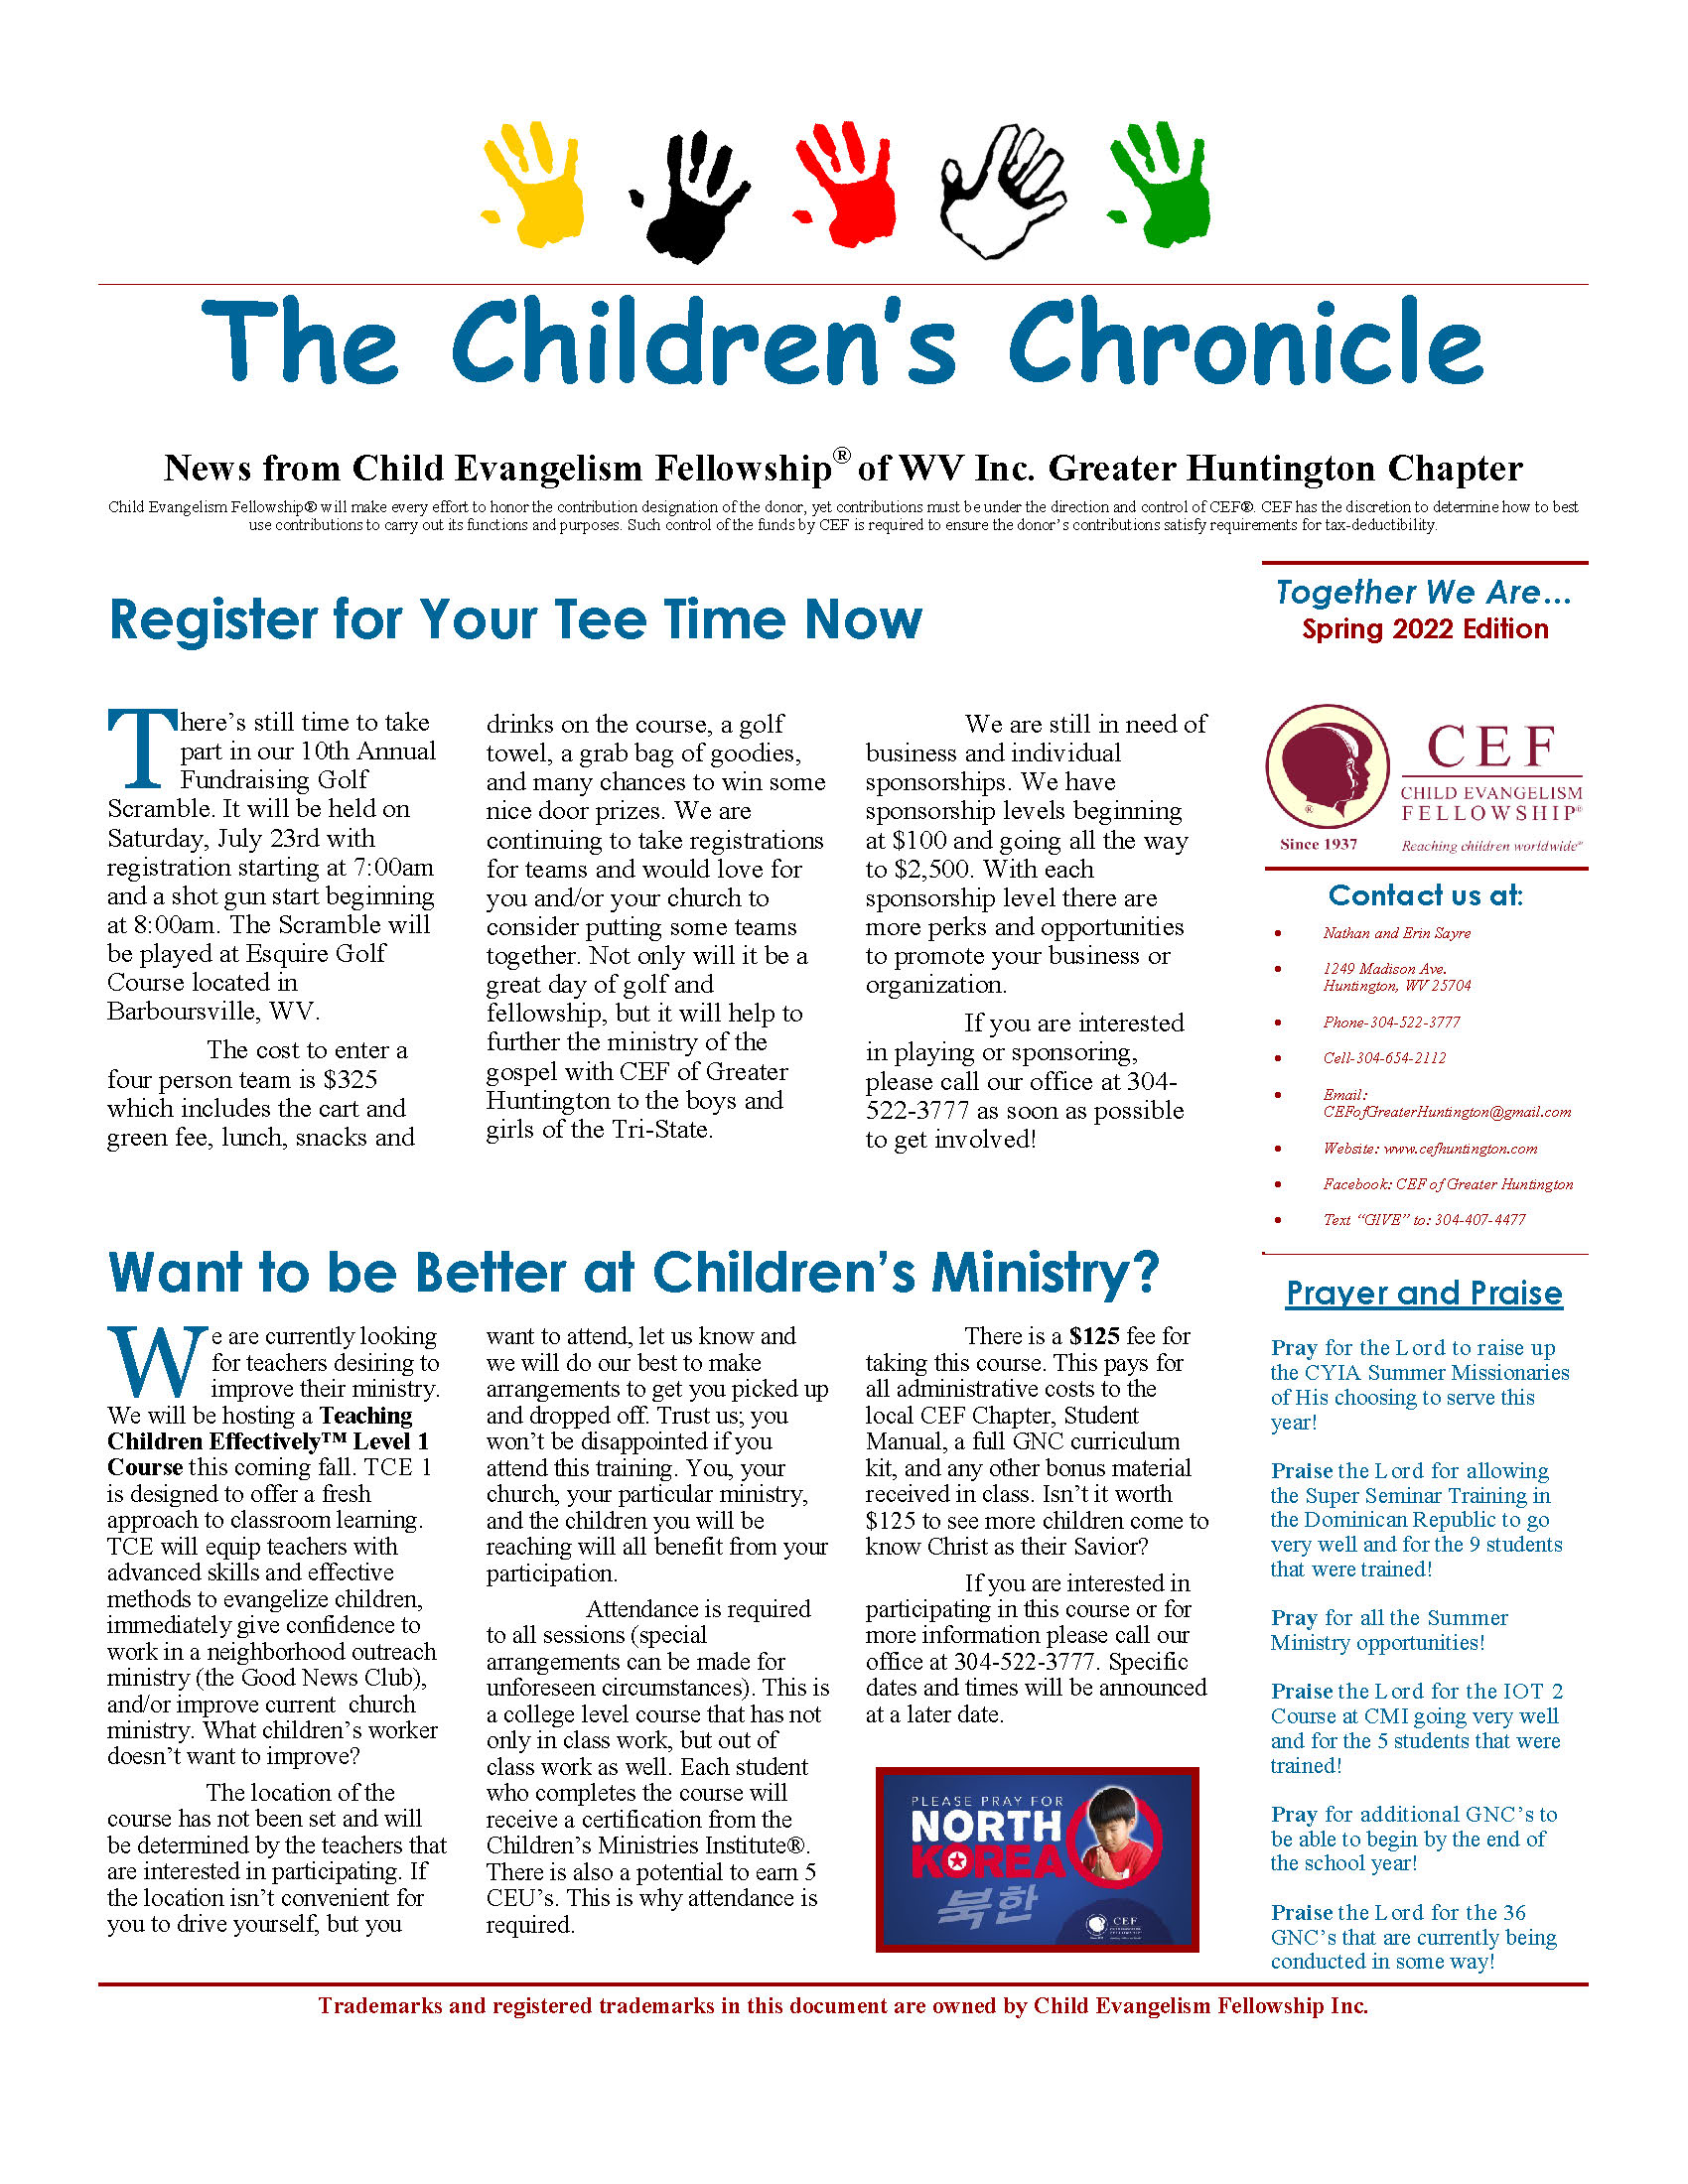 Spring 2022 Newsletter Page 1